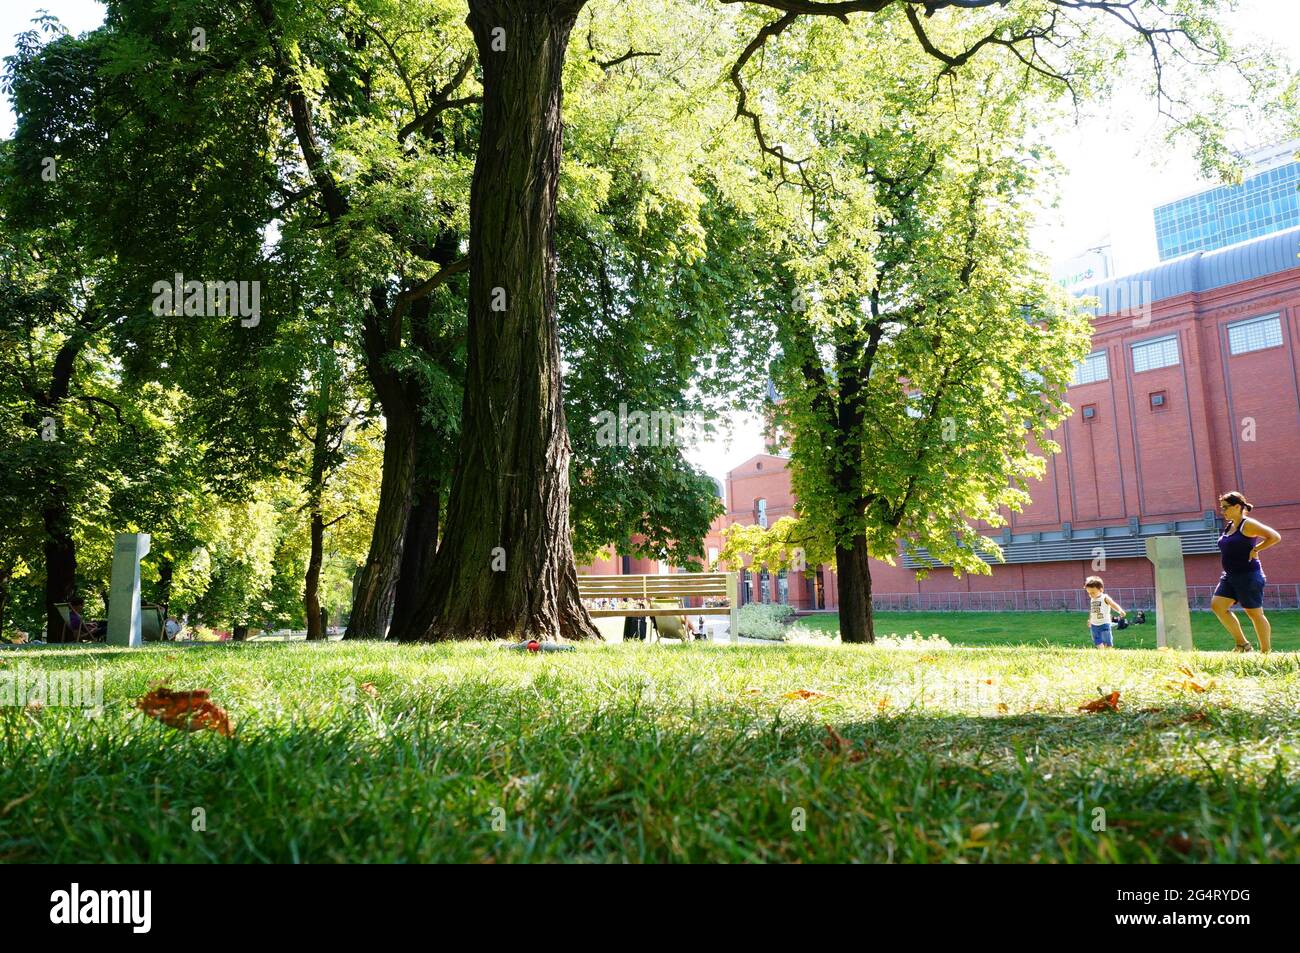 POZNAN, POLAND - Oct 30, 2015: Green grass at a park on a sunny day Stock Photo